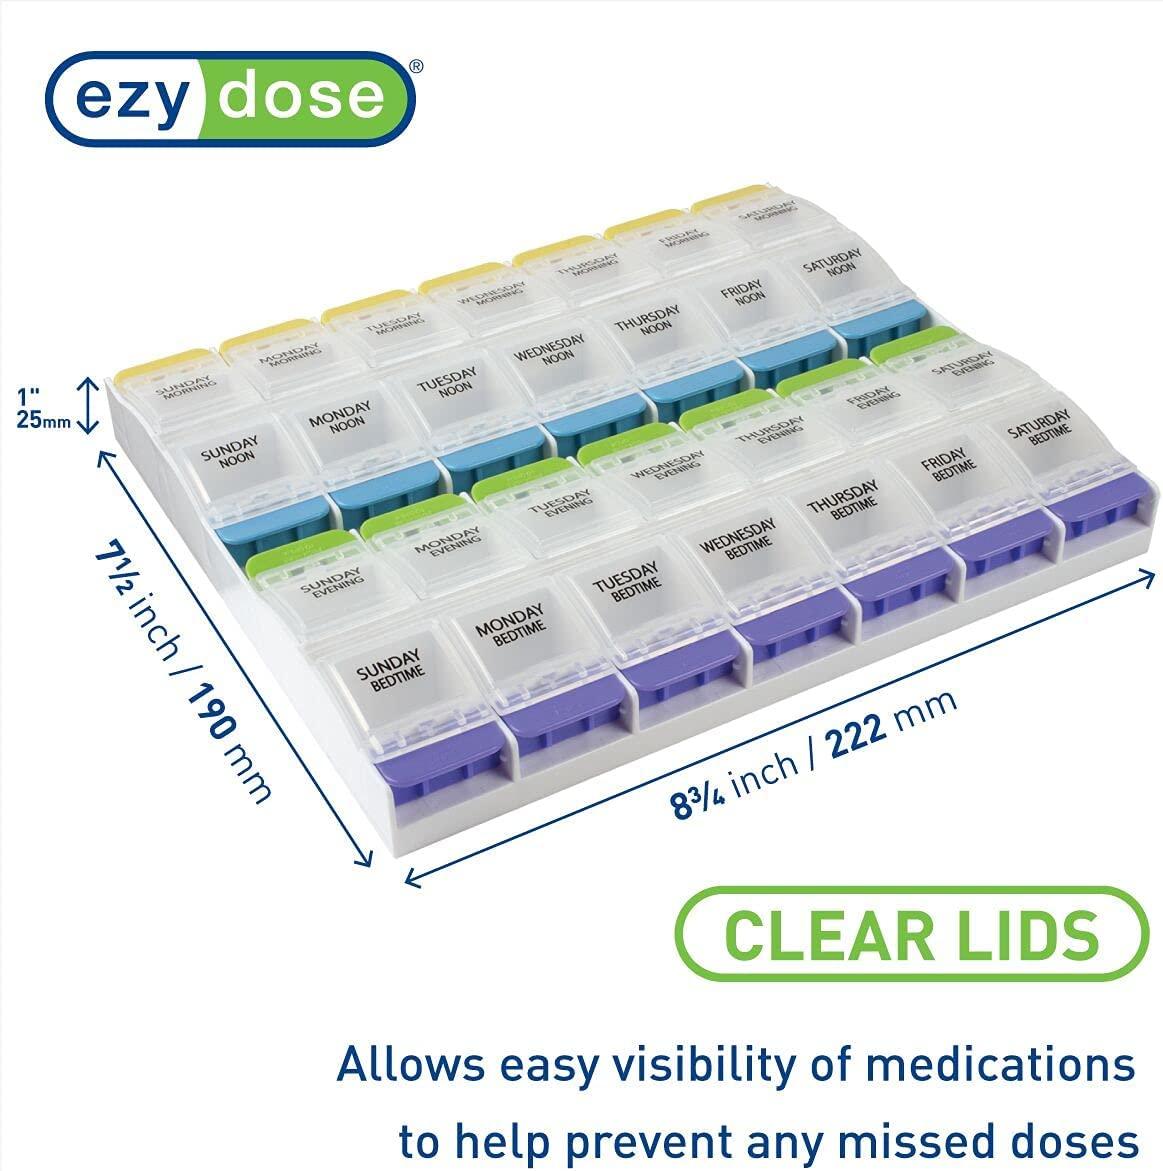 Ezy Dose Disposable Pill Vitamin and Medicine Organizer Pouches Zippered Seal Bags 400 Count